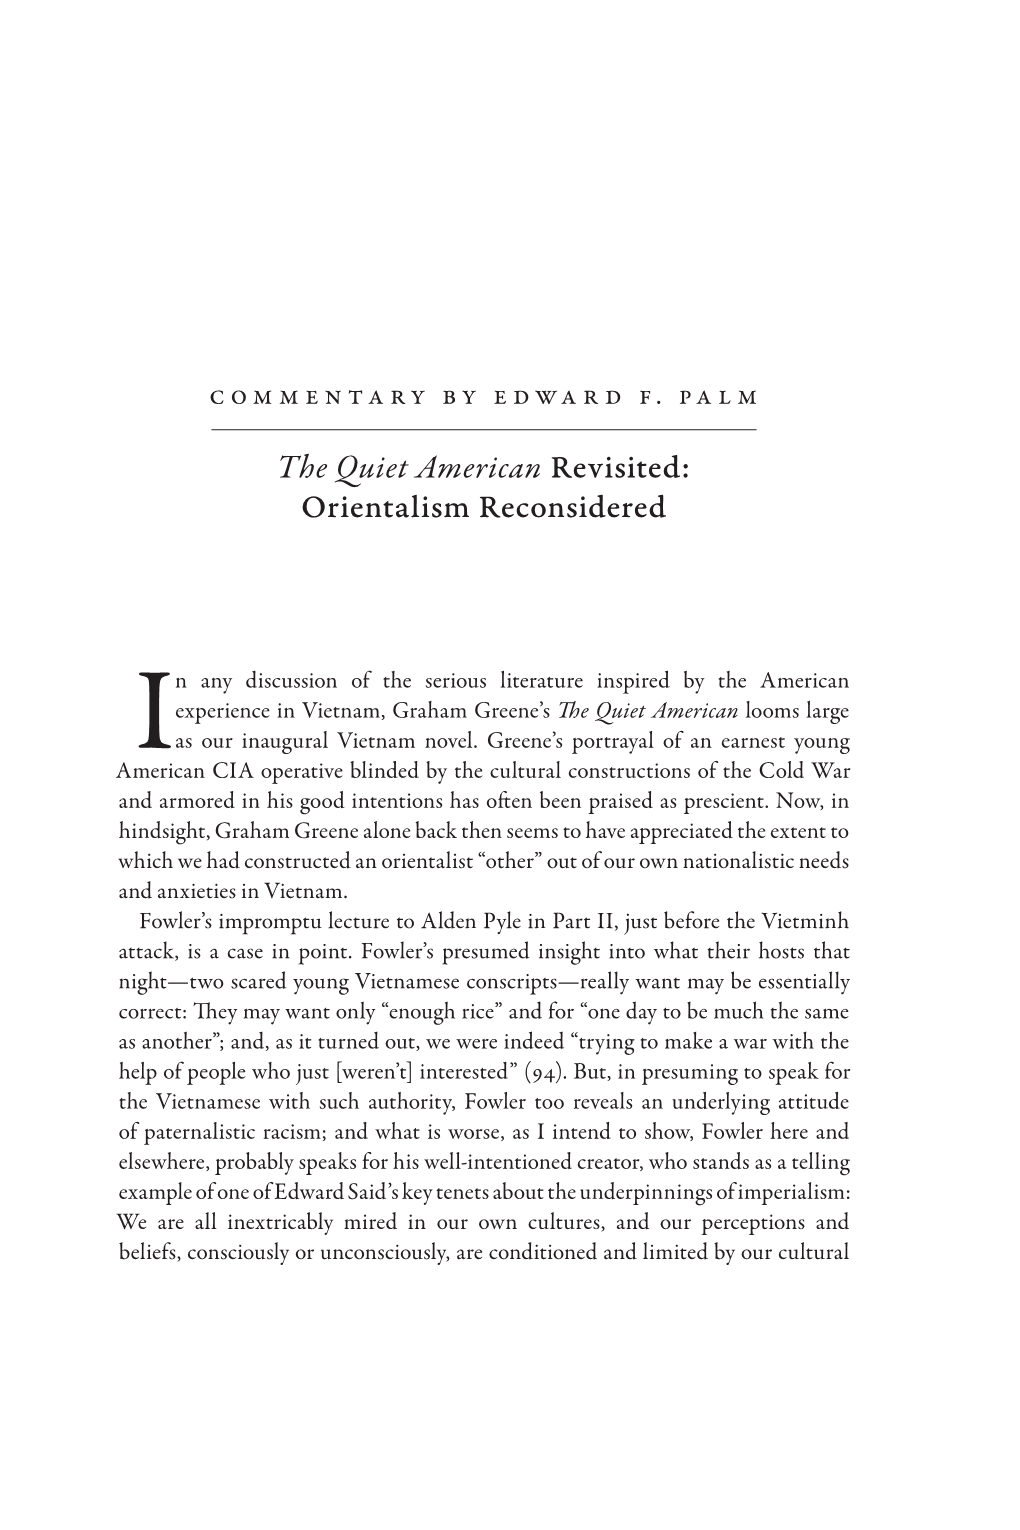 The Quiet American Revisited: Orientalism Reconsidered